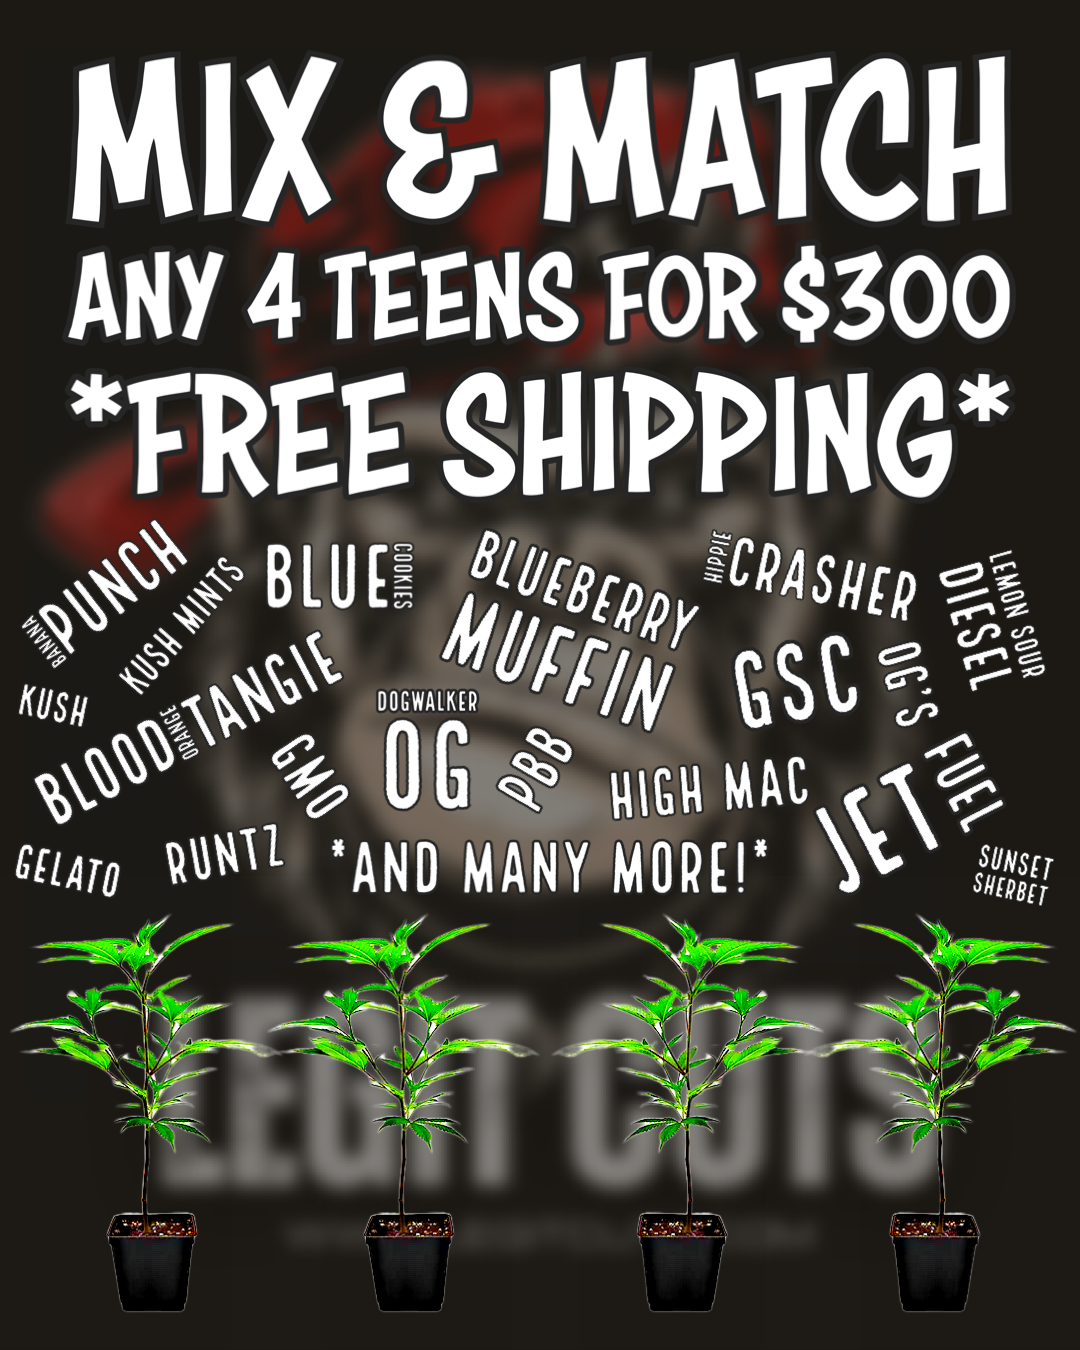 ANY 4 Teens! Mix & Match! Free Shipping!